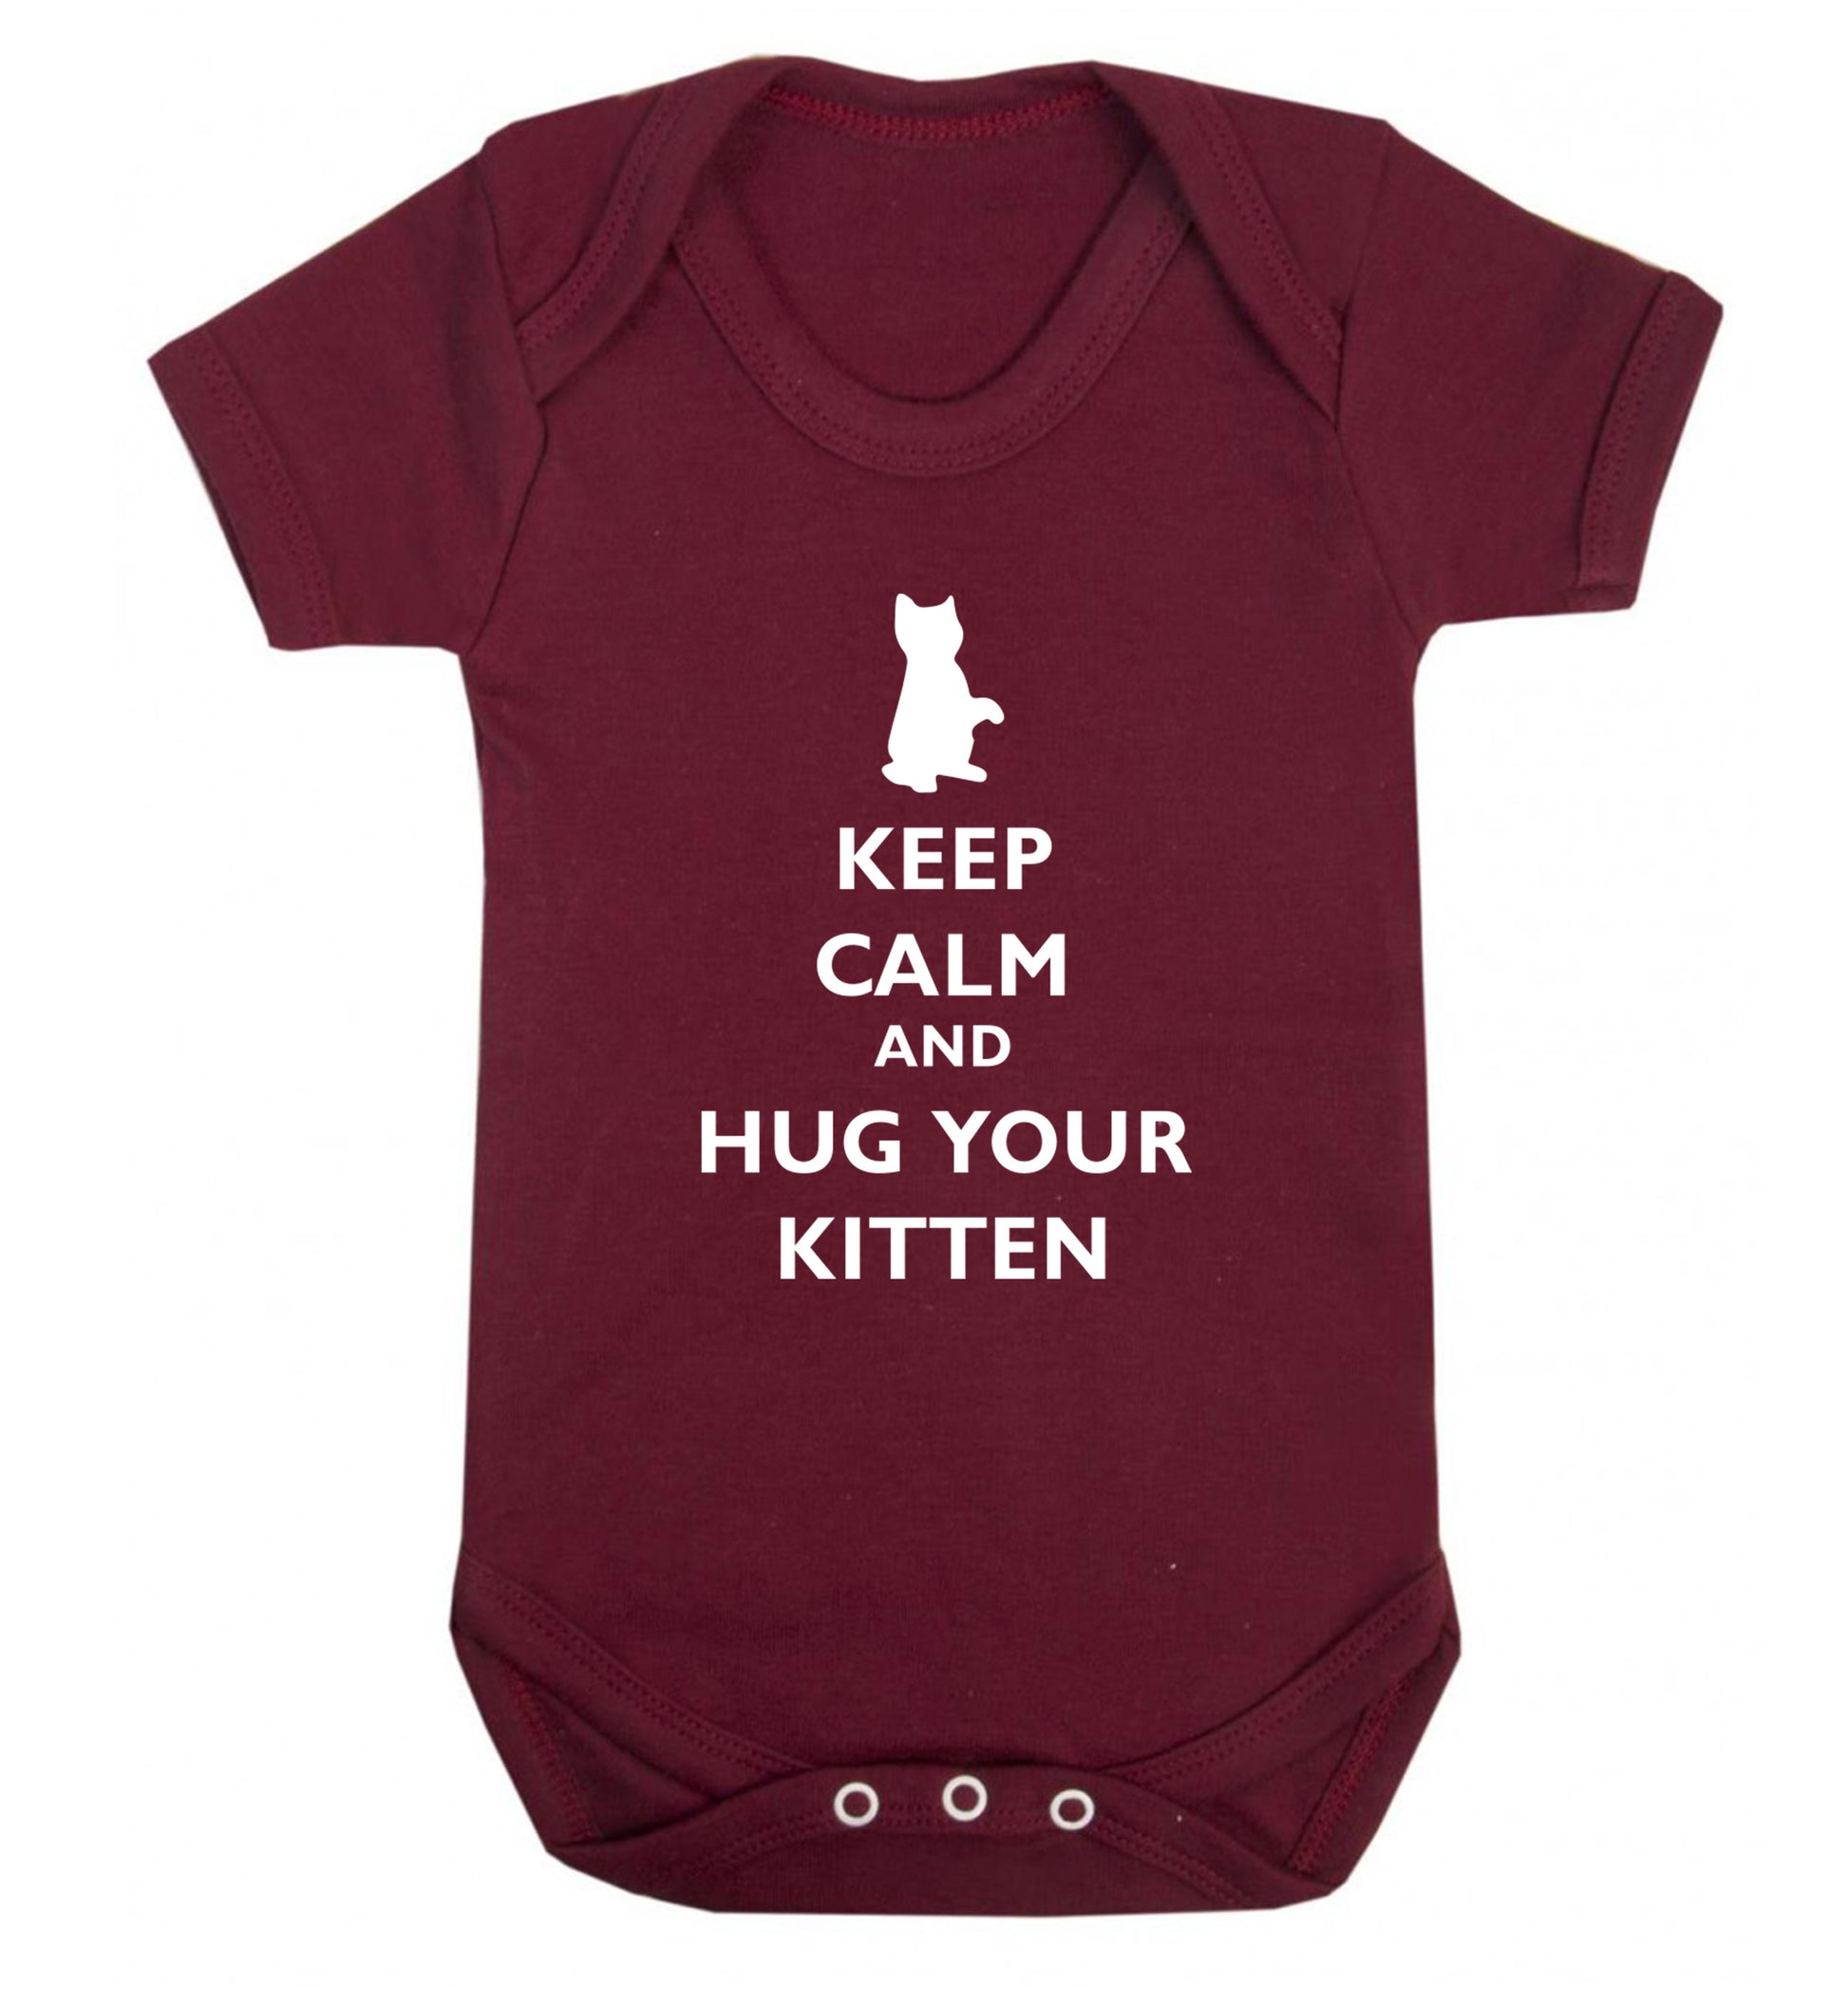 Keep calm and hug your kitten Baby Vest maroon 18-24 months